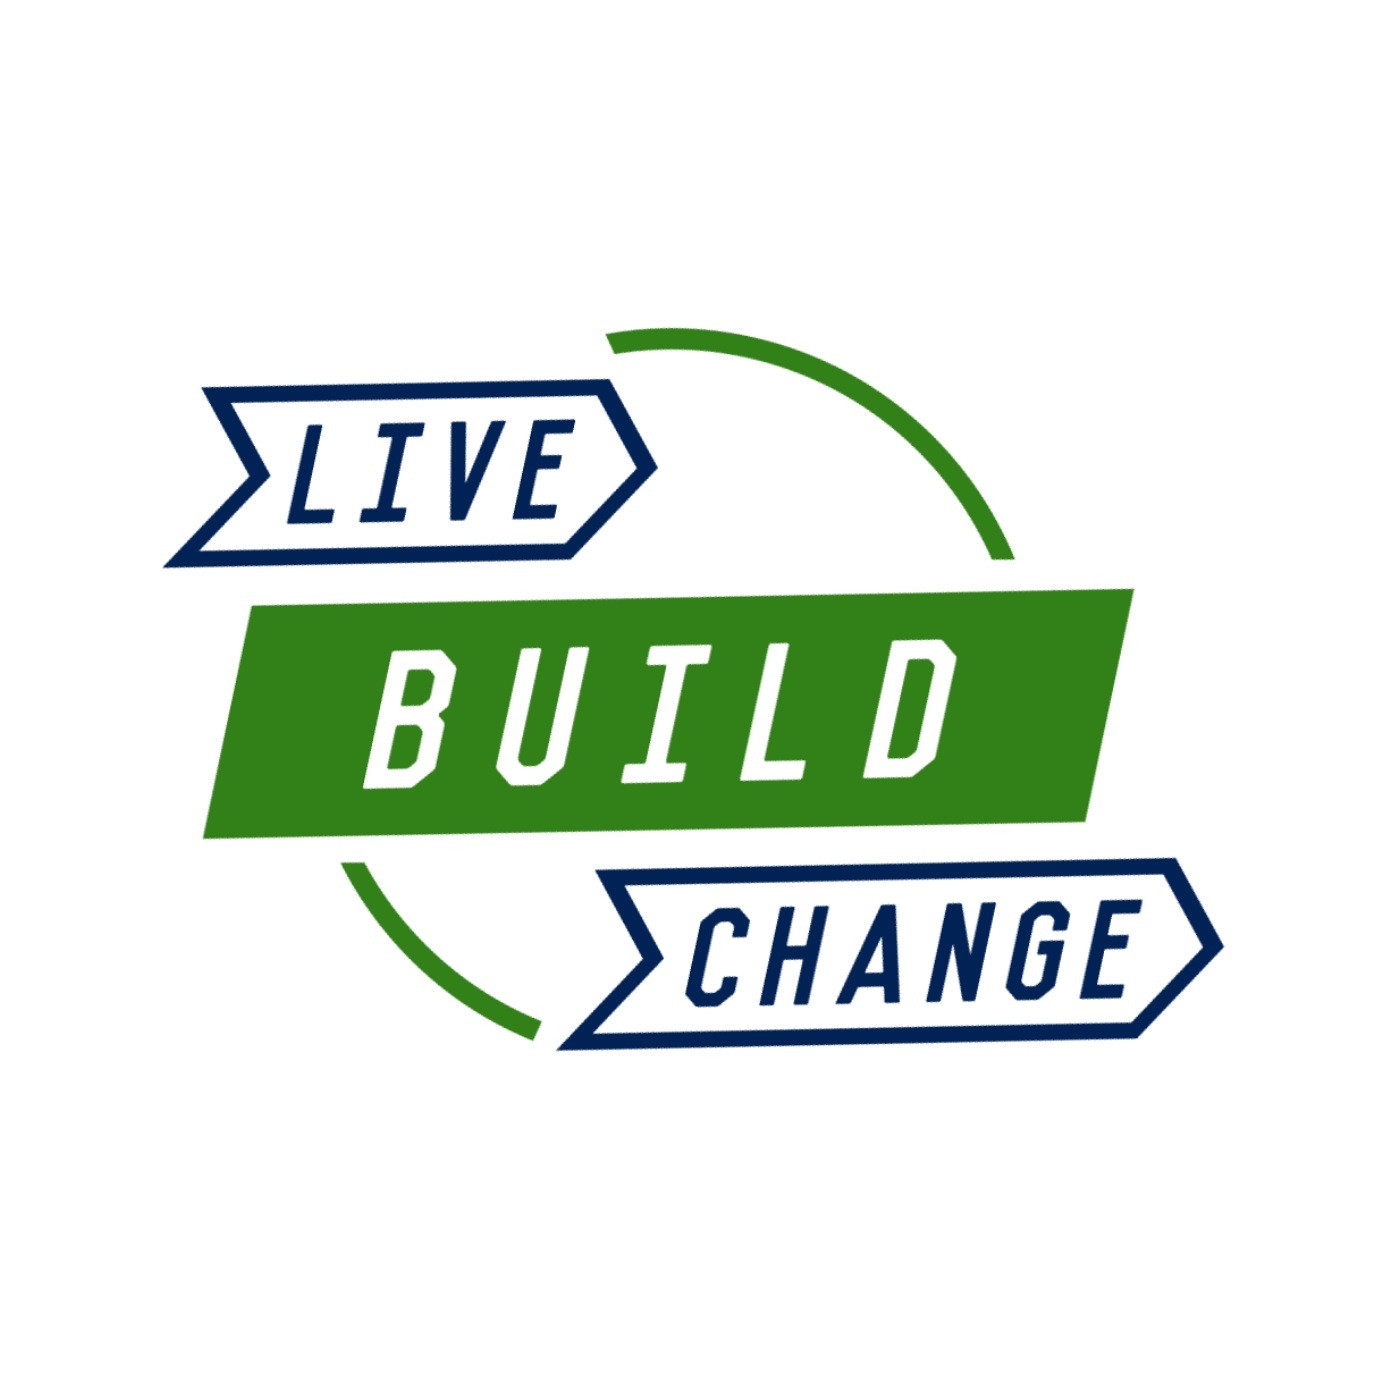 Live - Build - Change the Christian faith and business show